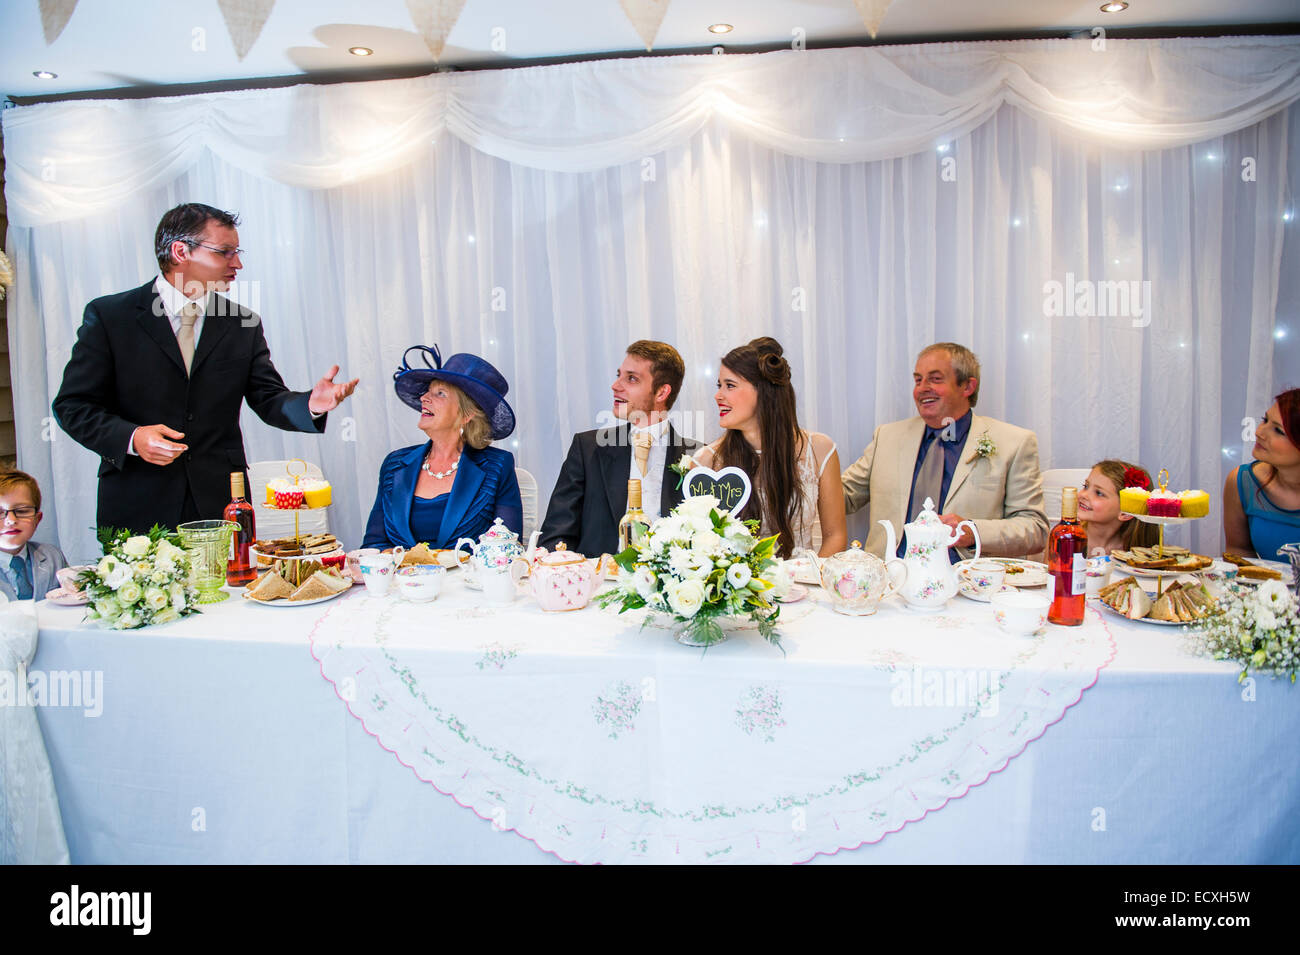 Getting married / Wedding day UK: guests at the top table  enjoying themselves as the best man gives his speech at the wedding reception celebration party after the wedding service Stock Photo